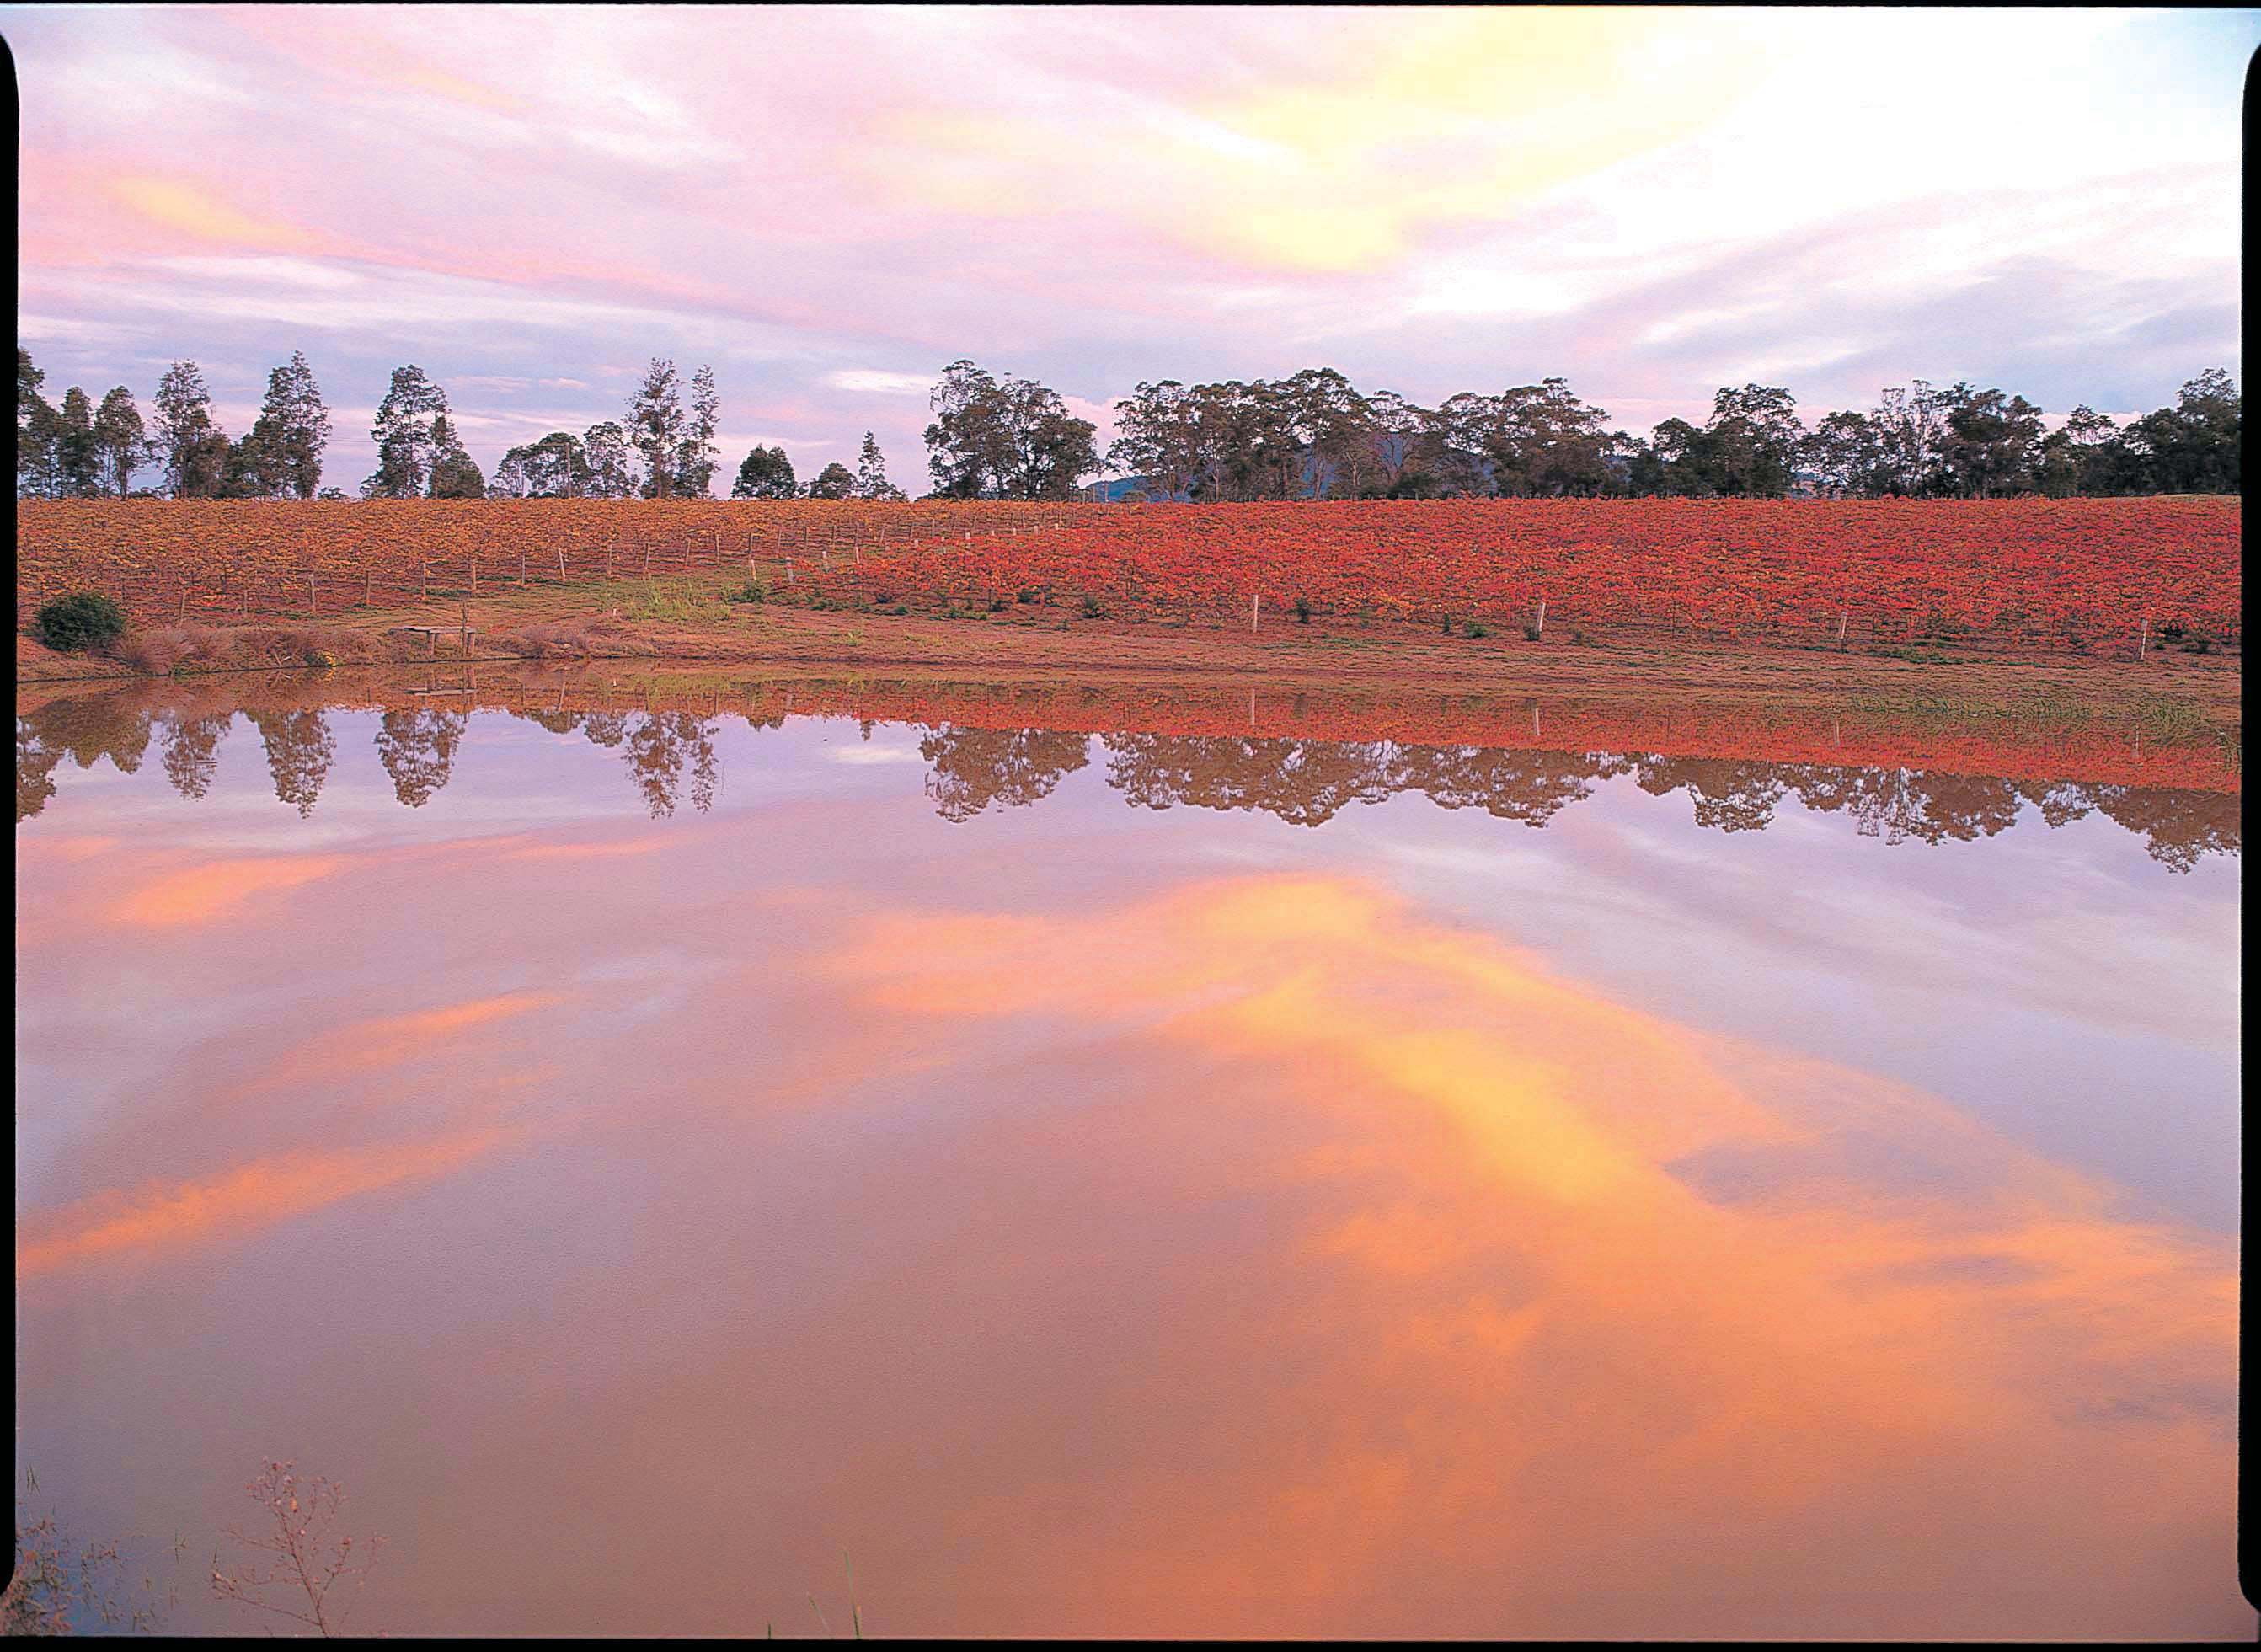 sunset on the vines next to a body of water reflecting the sky